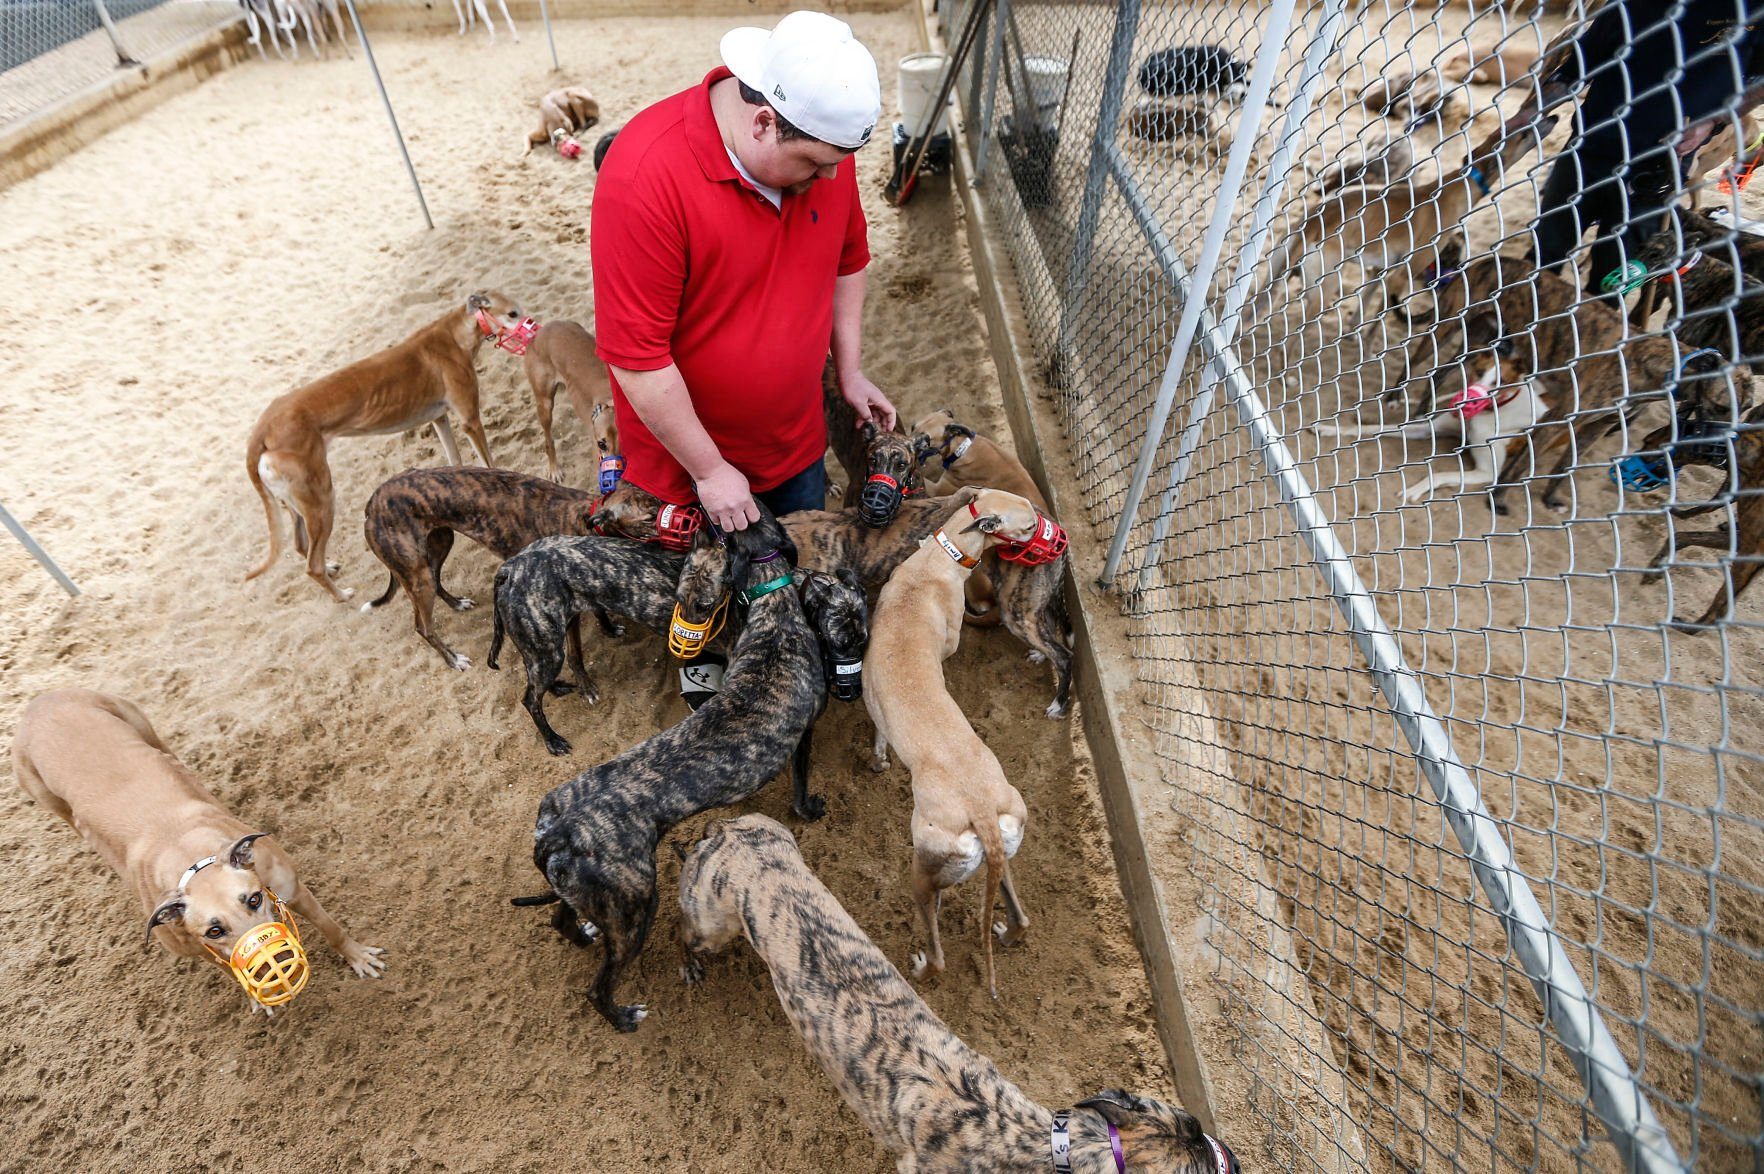 Jake Ungs takes some time with the greyhounds that are part of Copper Kettle Kennel, which his father, Dave Ungs, started in 1993. The final season for Dubuque’s Iowa Greyhound Park started Saturday and concludes May 15.    PHOTO CREDIT: Dave Kettering